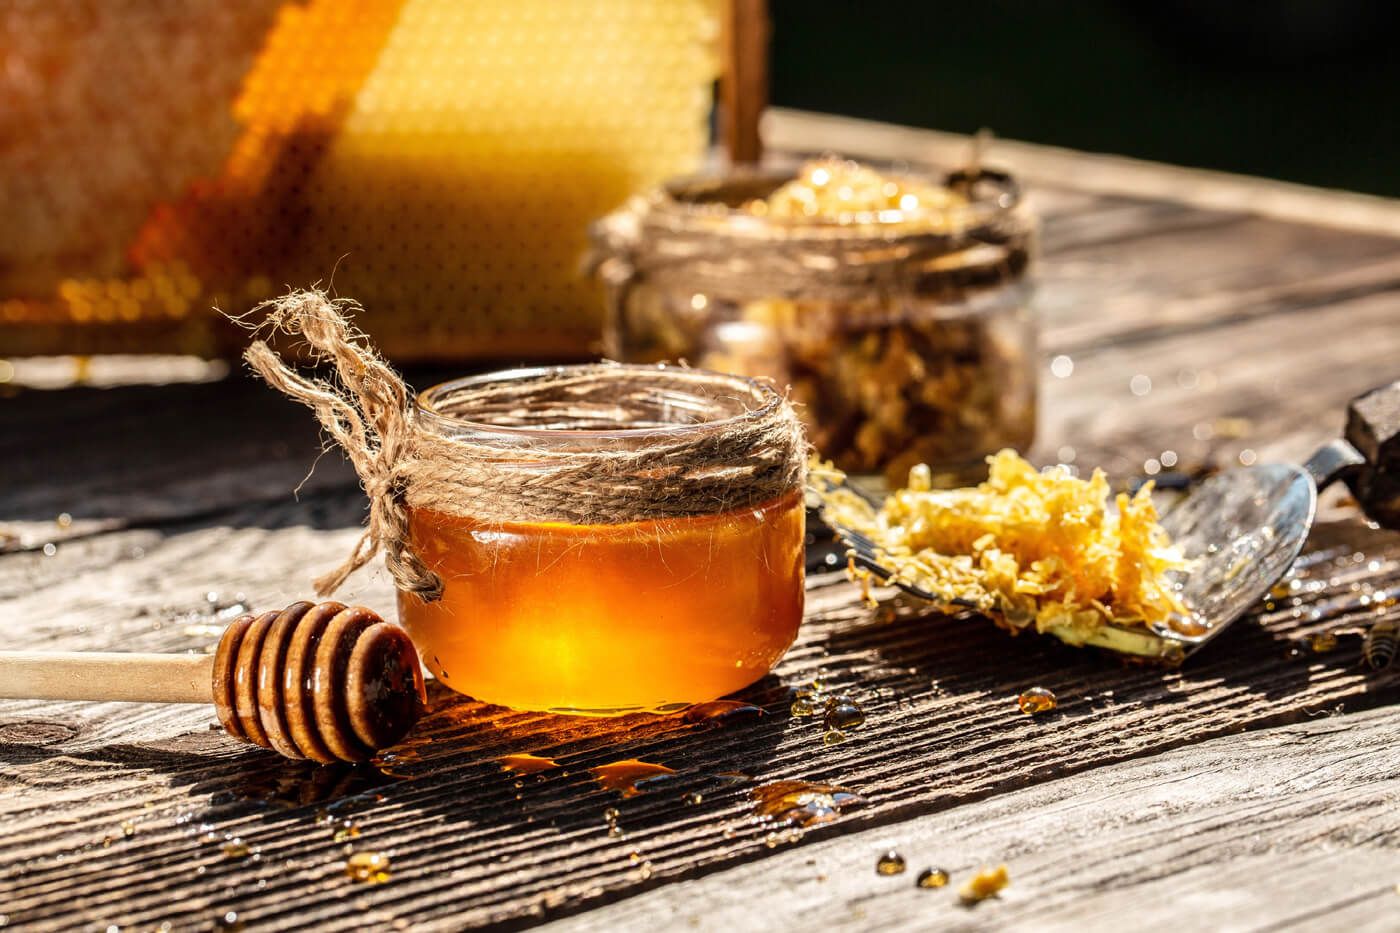 Honey from Bee colonies which are shrinking worldwide